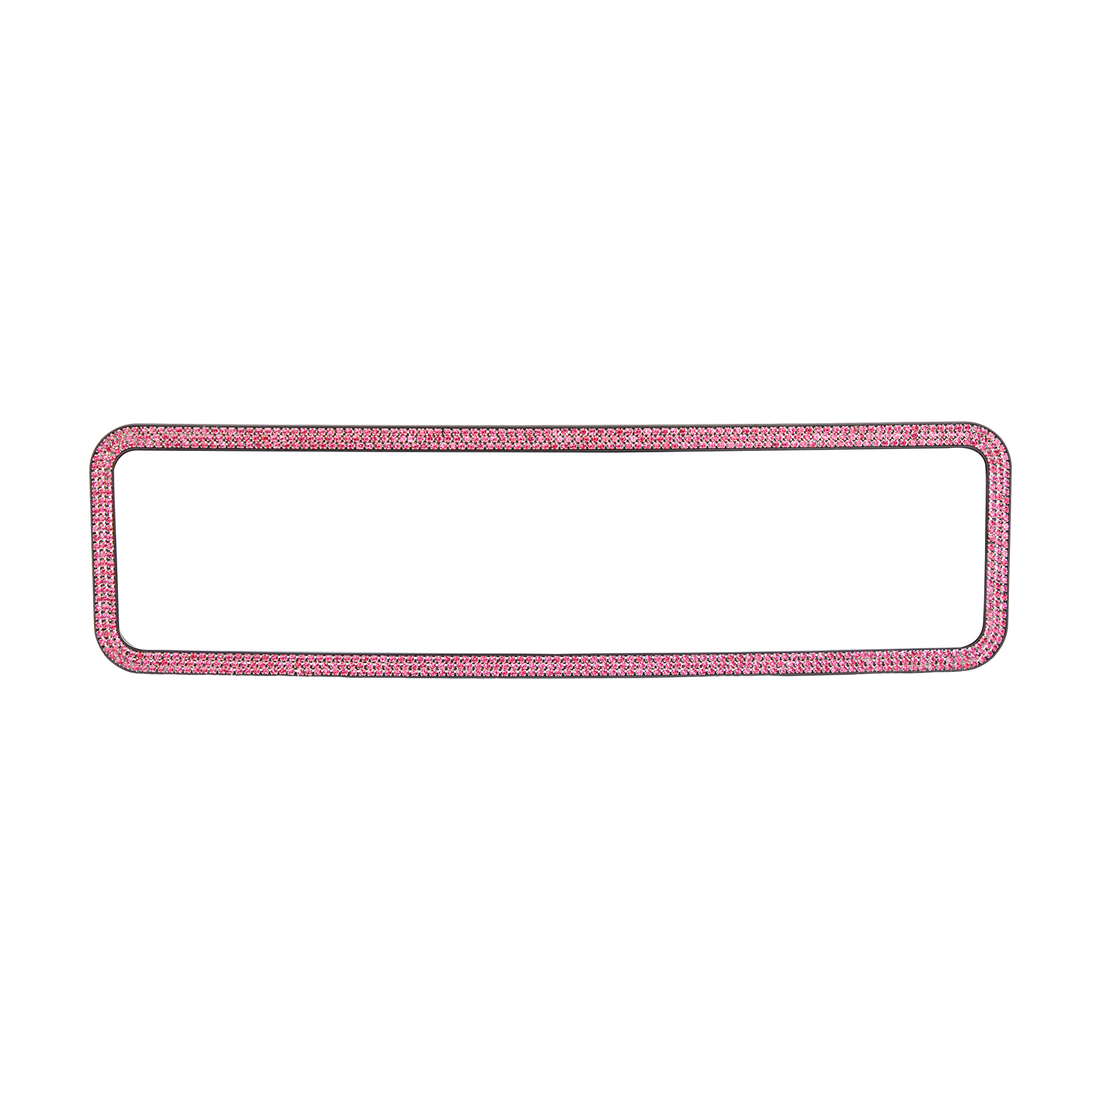 JOYTUTUS Bling Car Rear View Mirror, Universal 11.81 Inch Panoramic Rearview Mirror Accessories -Pink